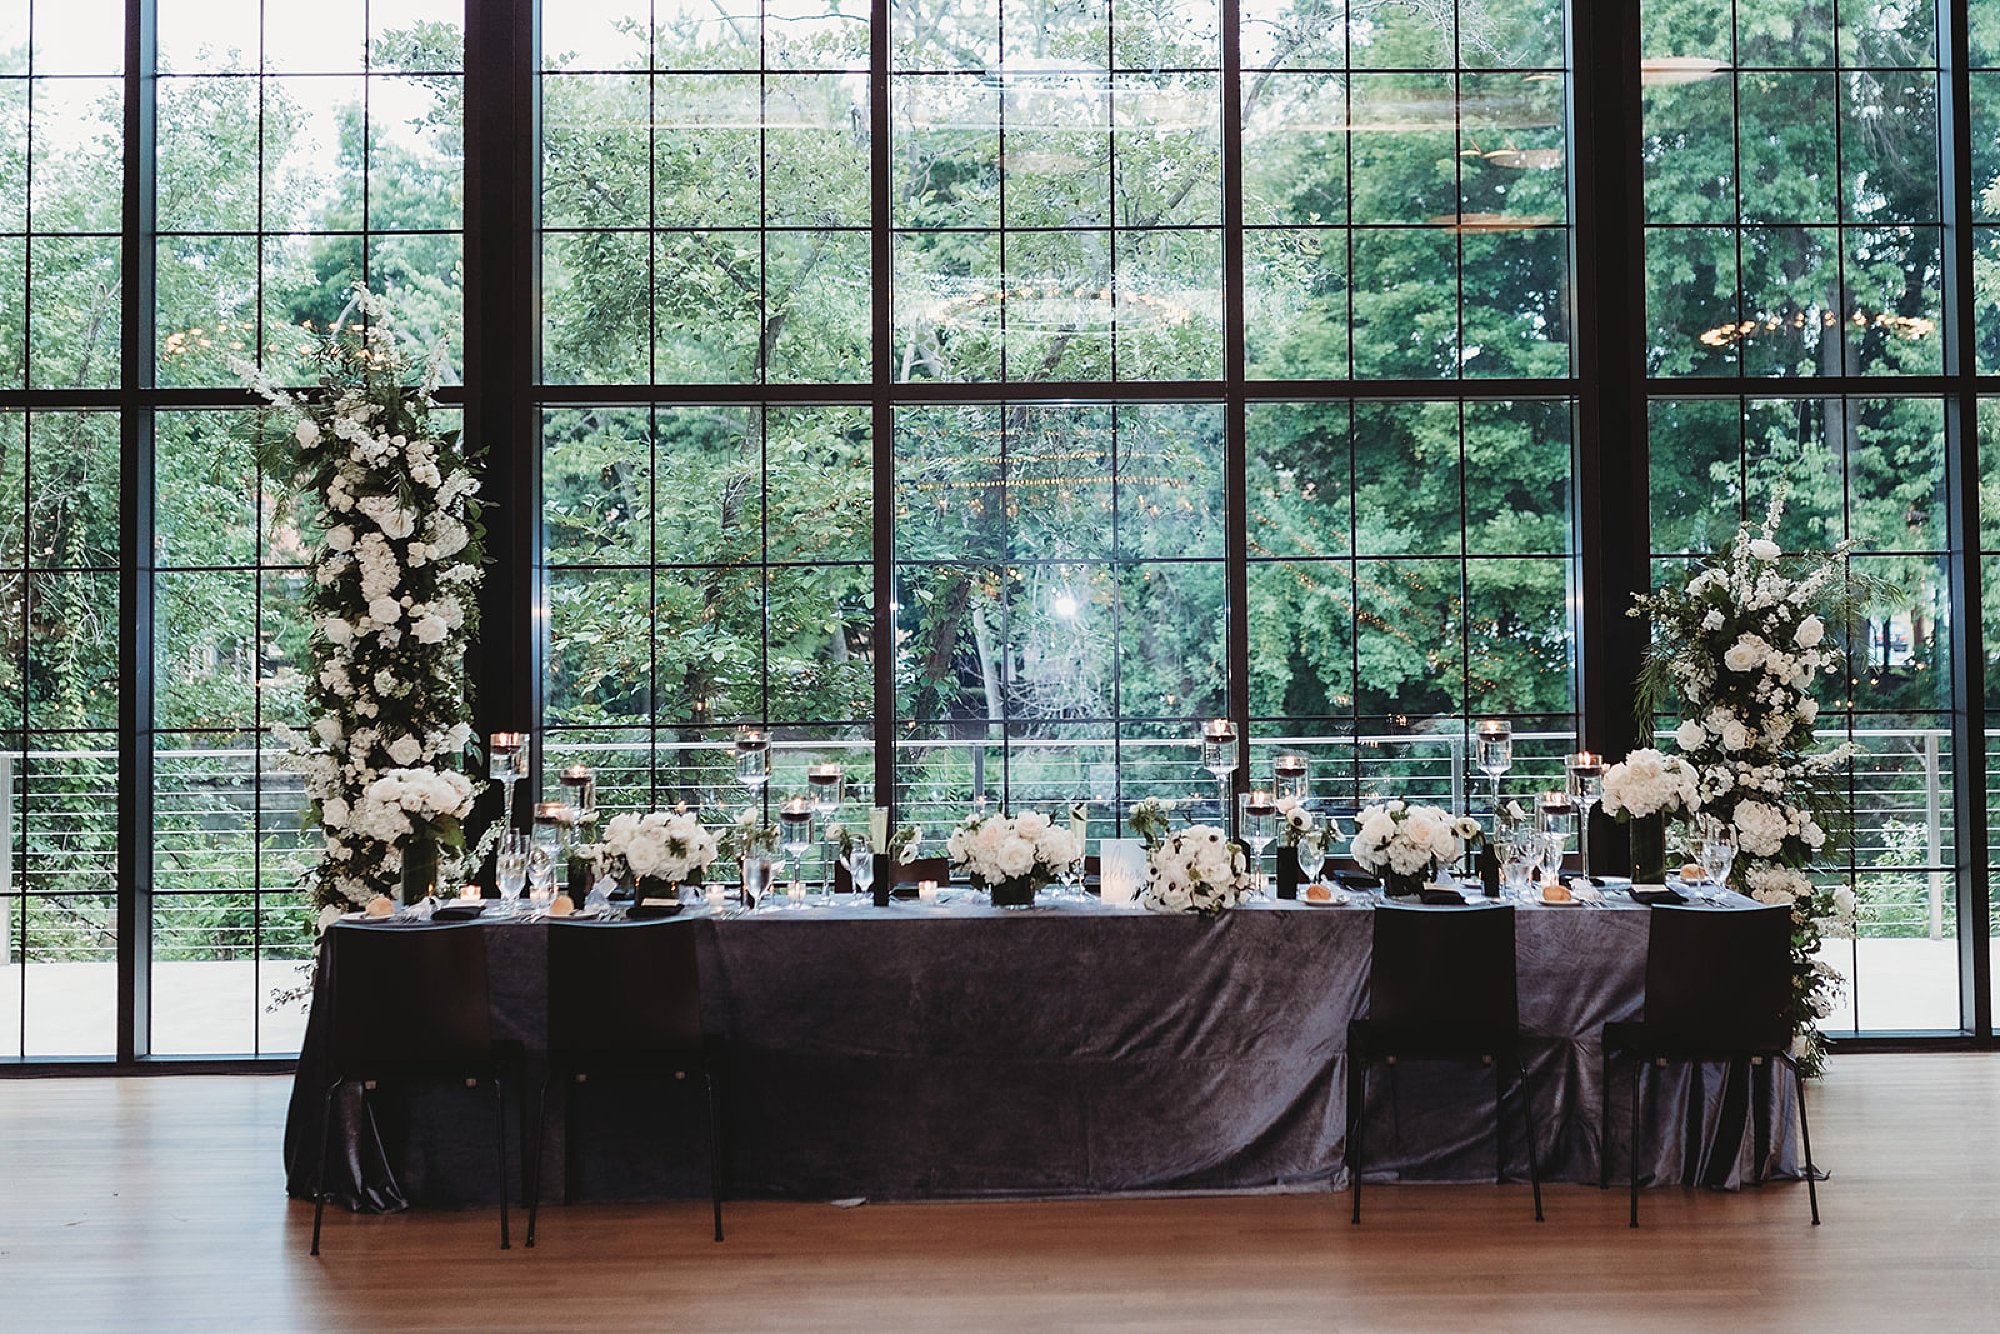 head table by window with tall floral installations at side